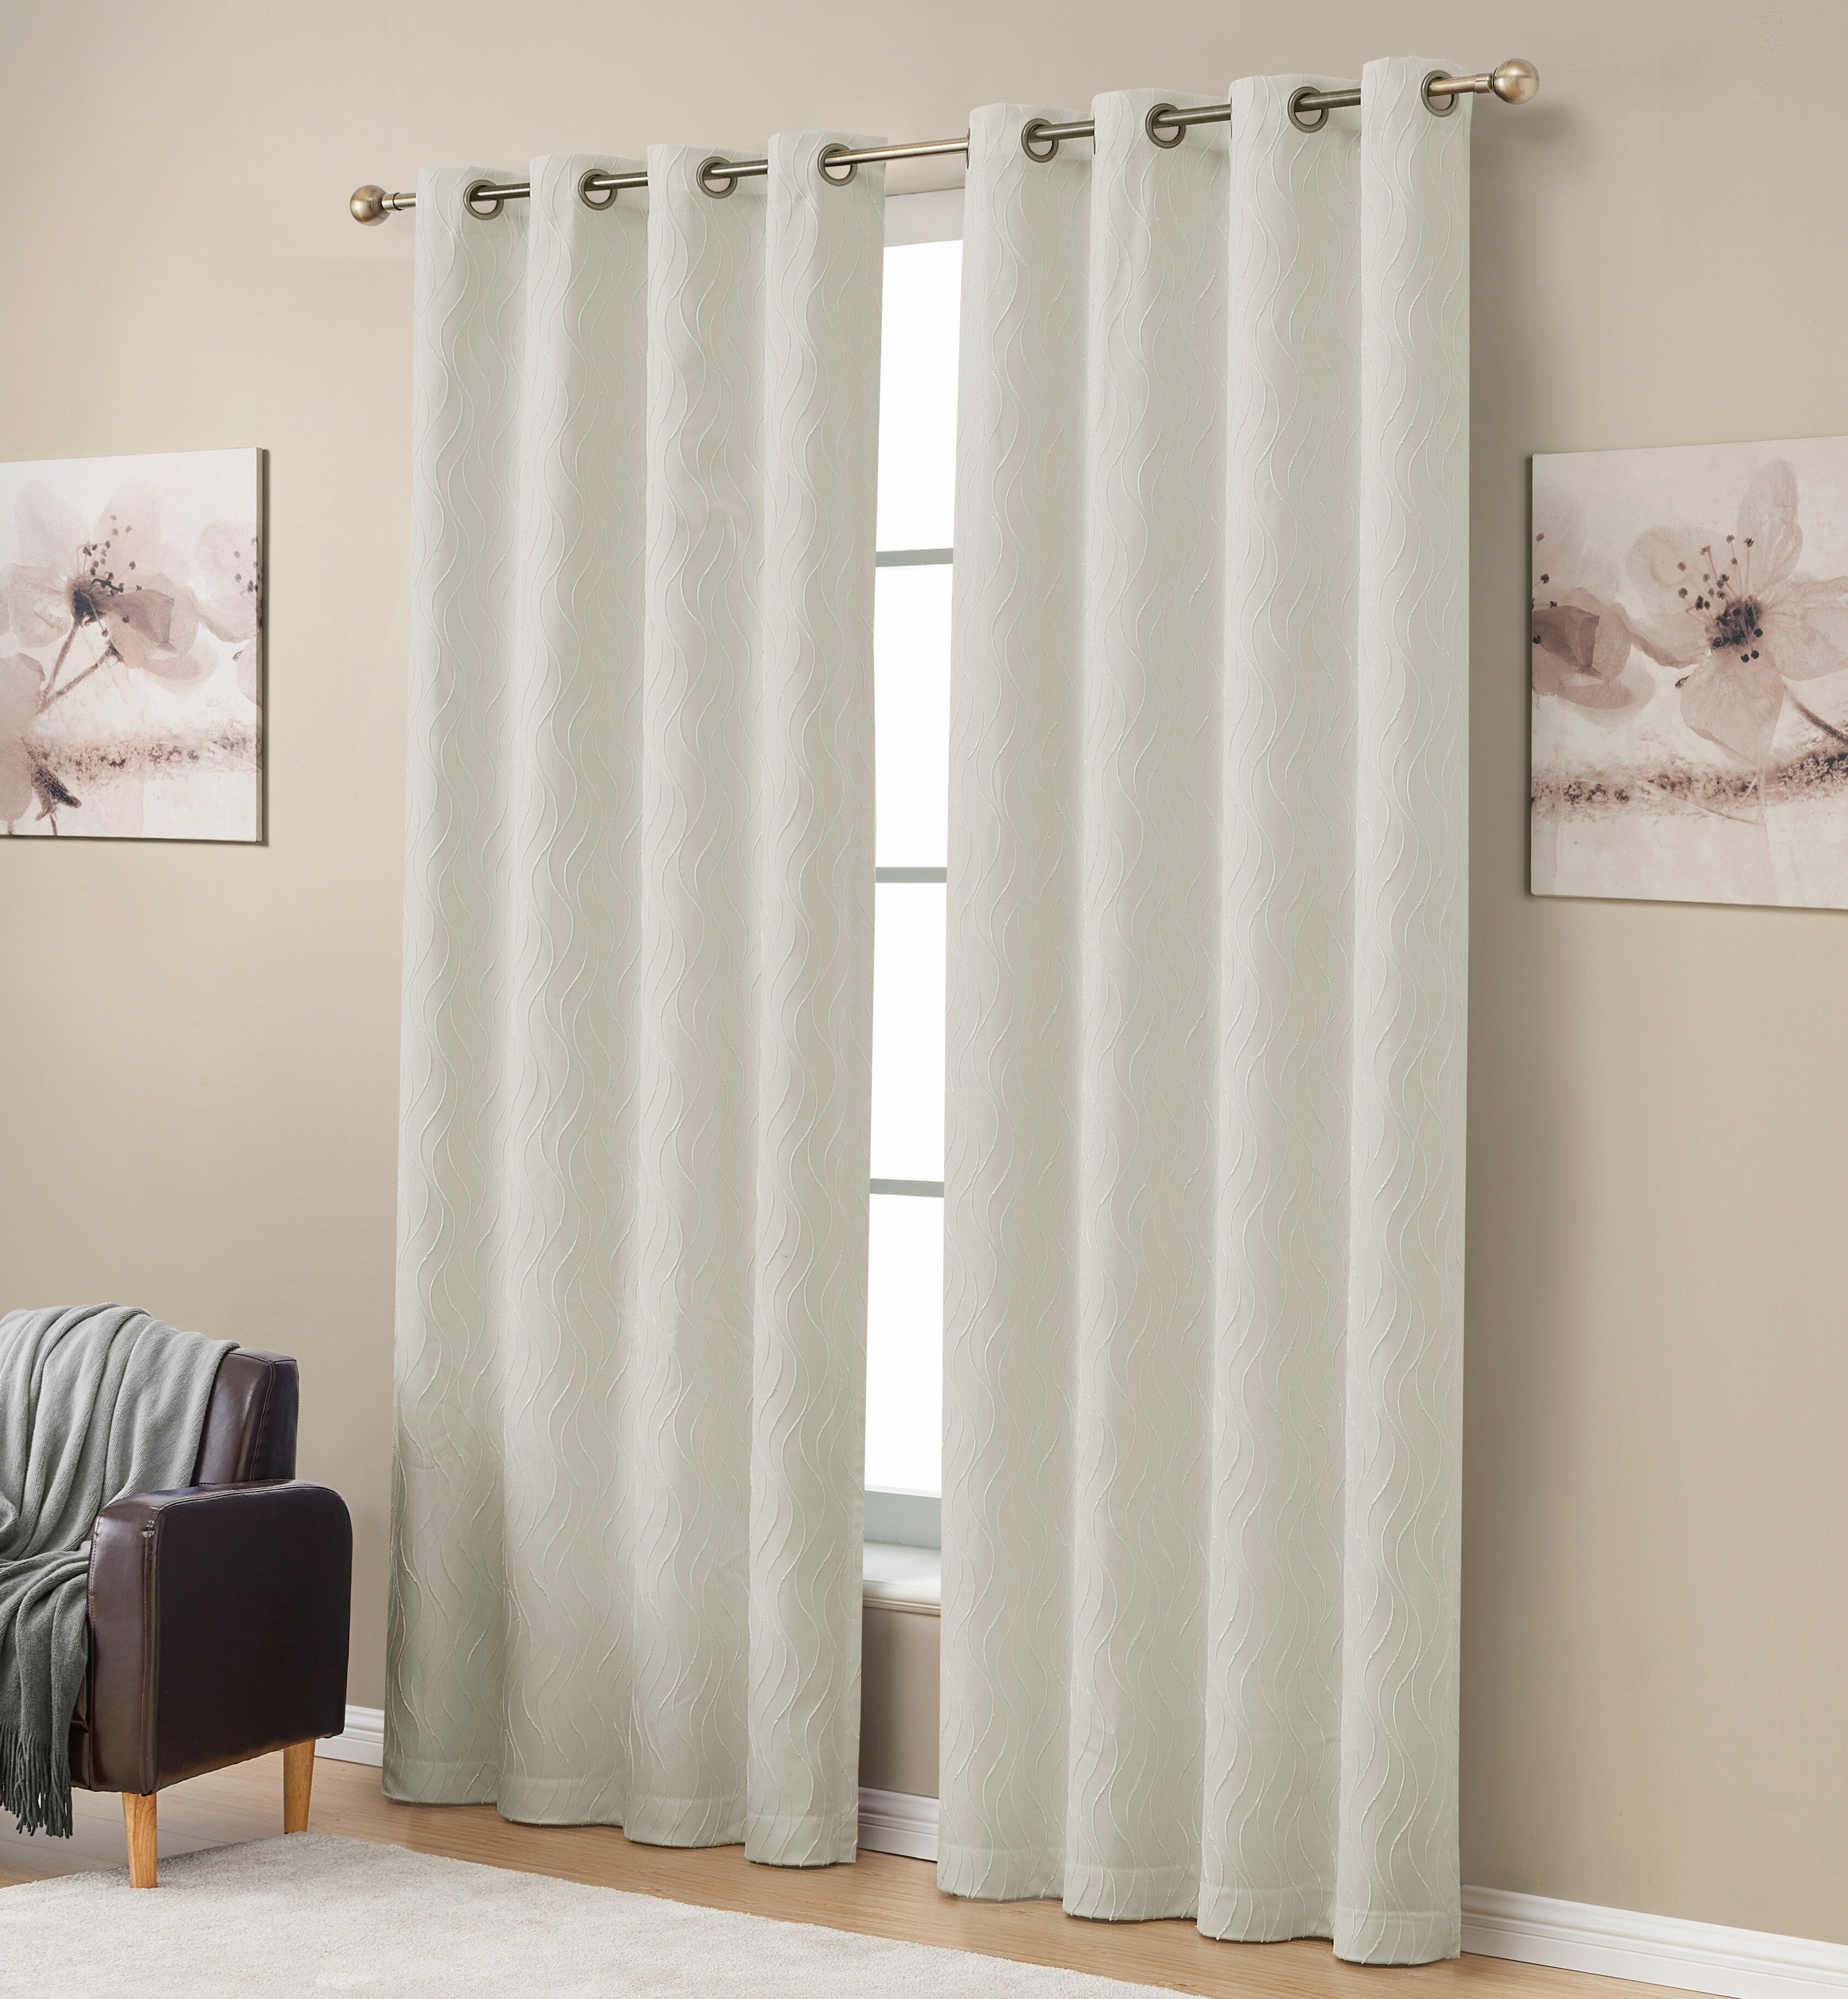 Ring Top Thermal Insulated Blackout Small Window Curtain For Bedroom Kitchen New 